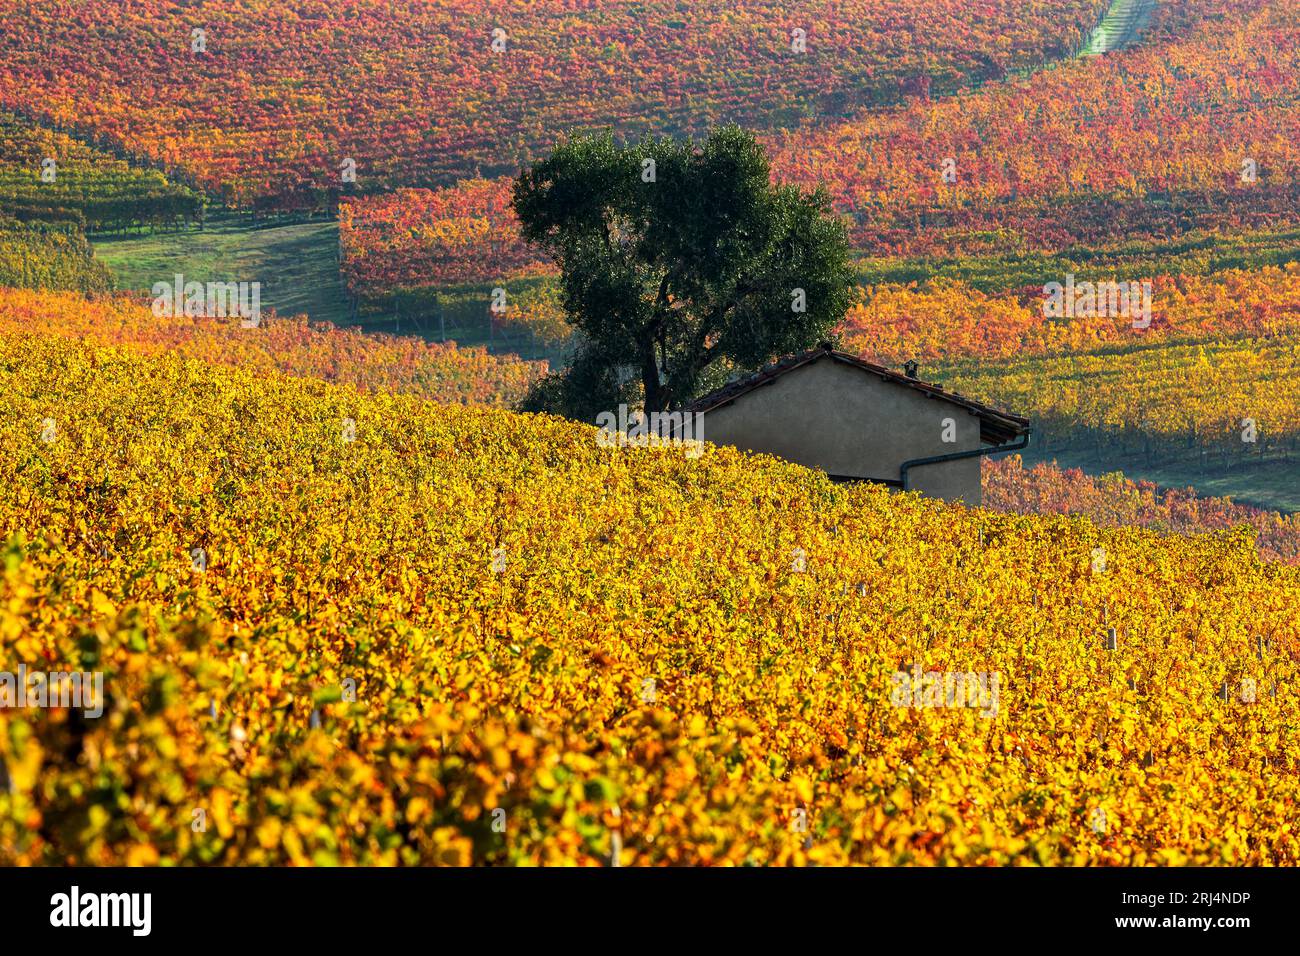 Autumnal vineyards with yellow leaves and small rural house on background in Piedmont, Italy. Stock Photo